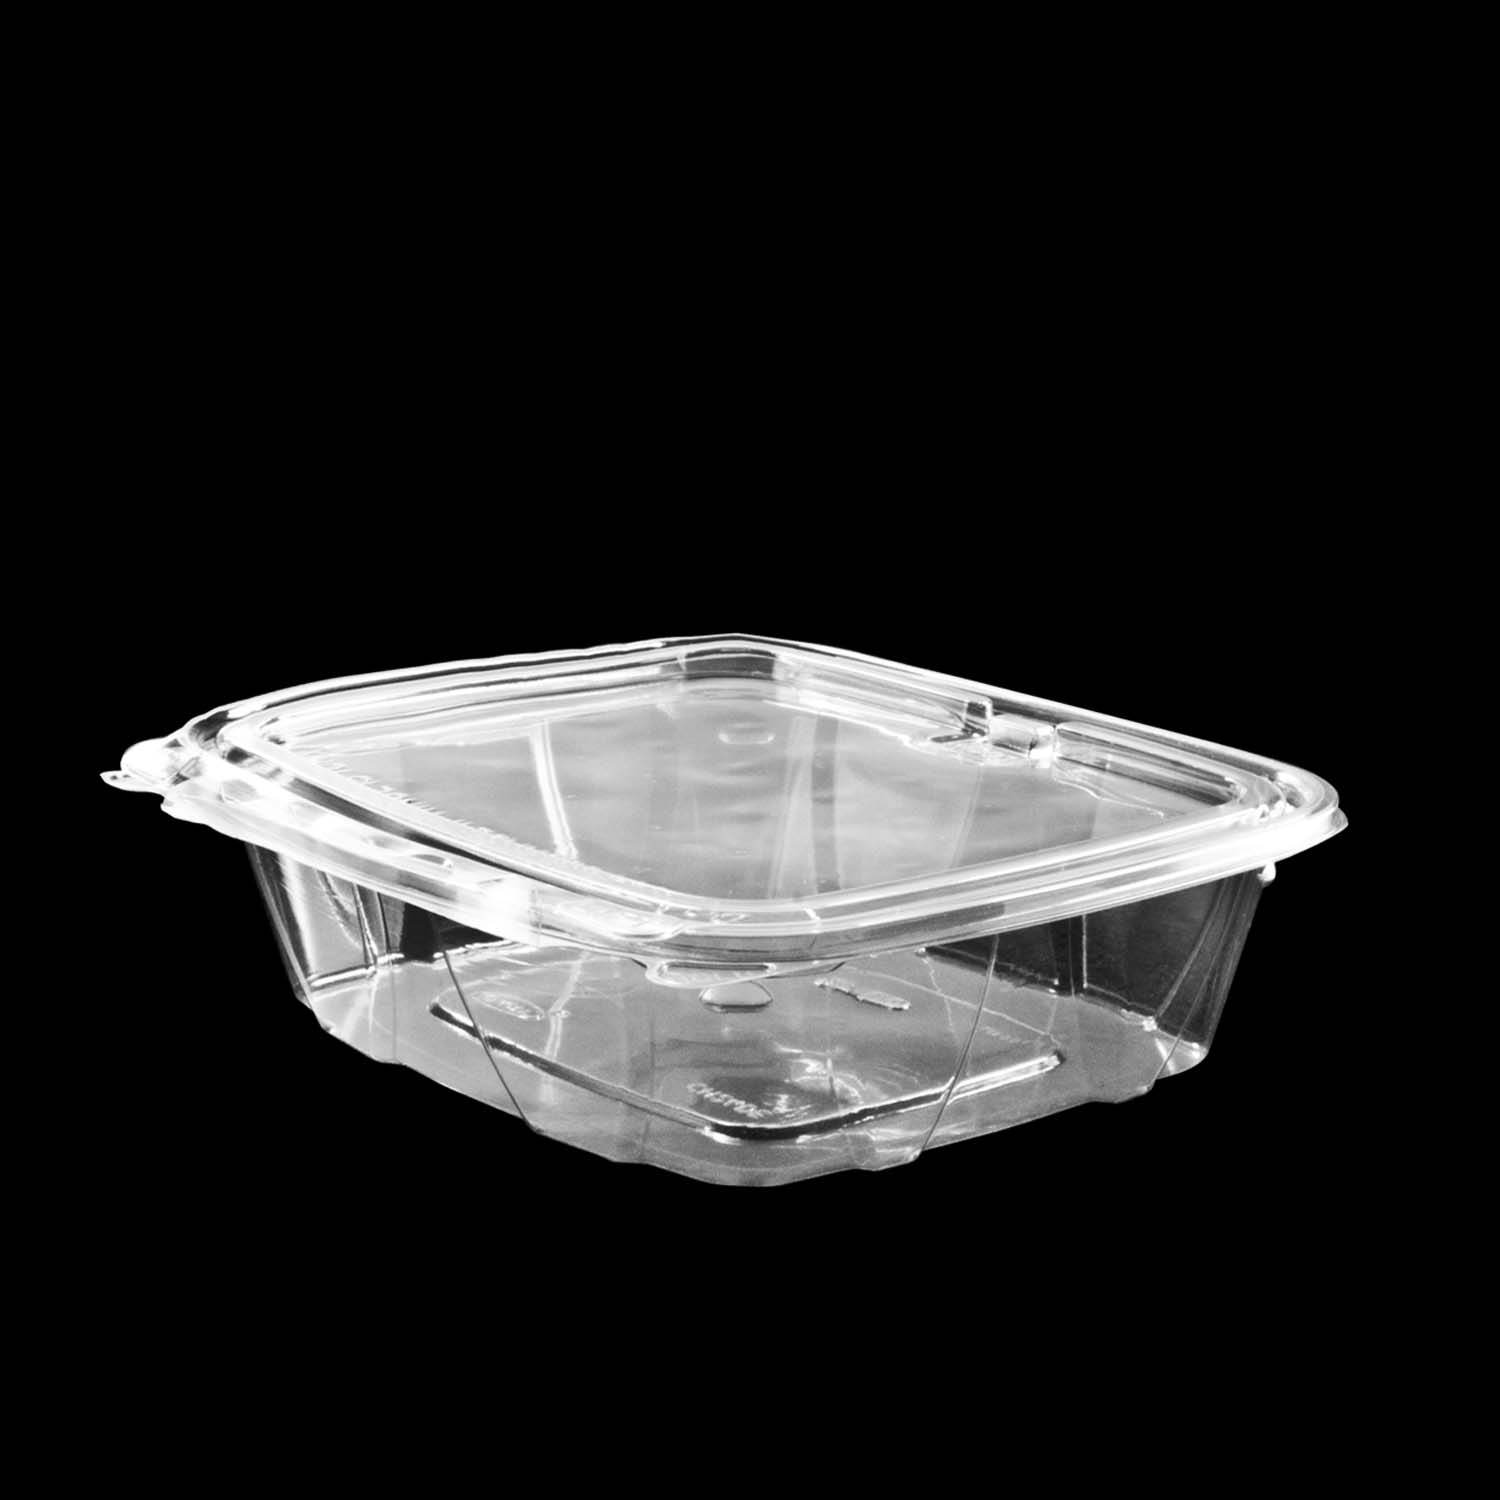 24OZ SAFESEAL CONTAINER FLAT
LID 200